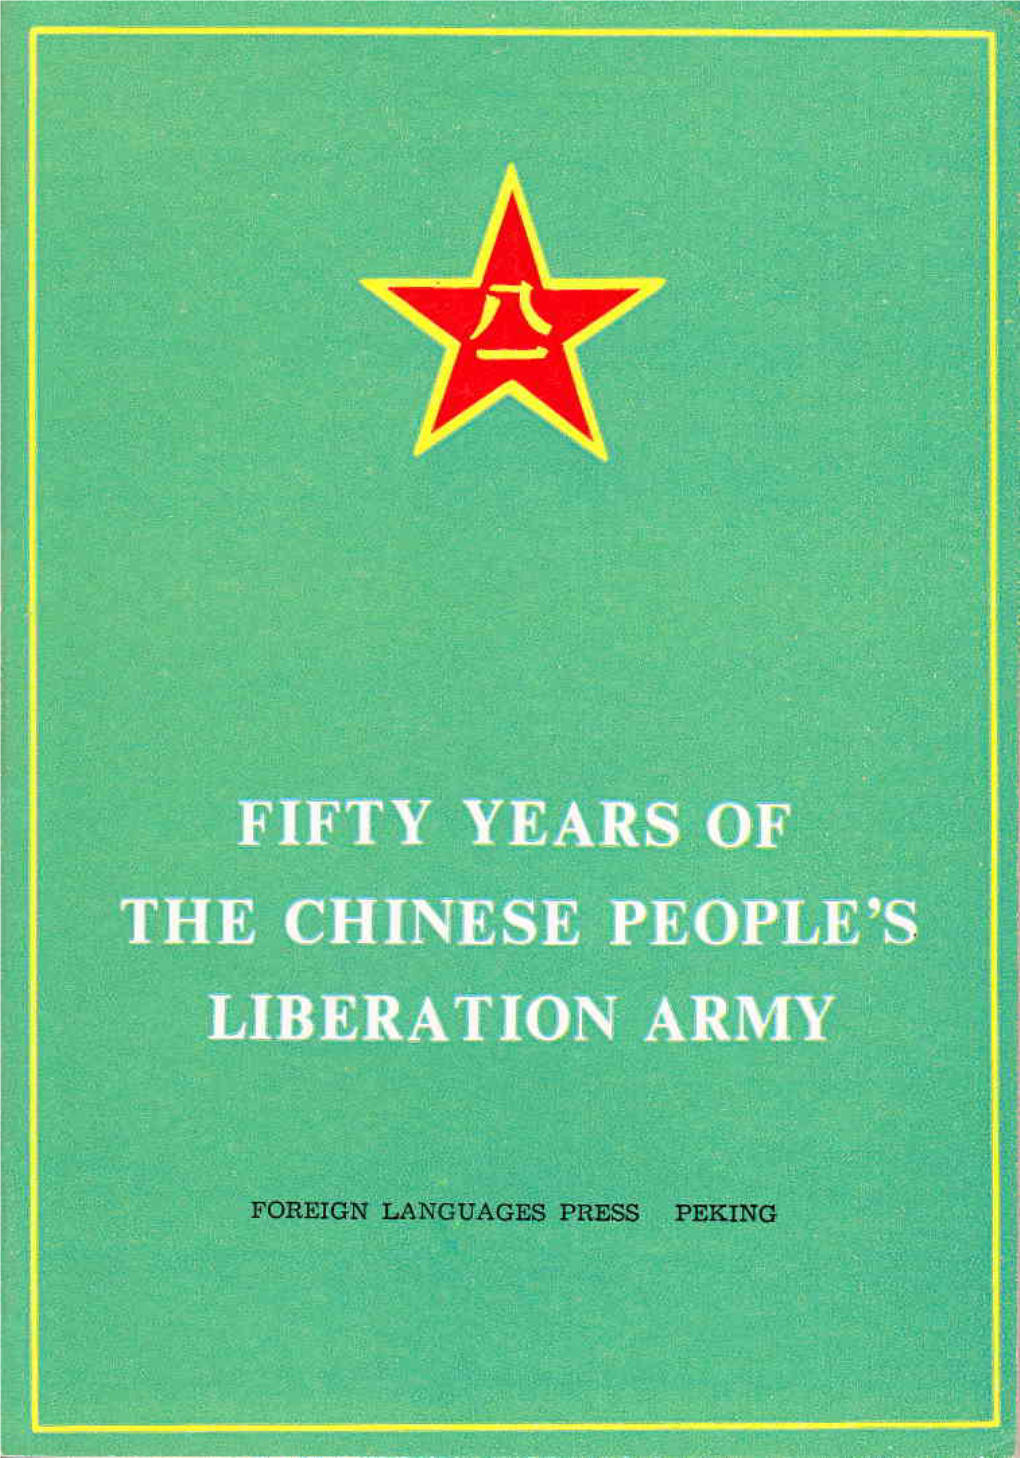 Fifty Years of the Chinese People's Liberation Army